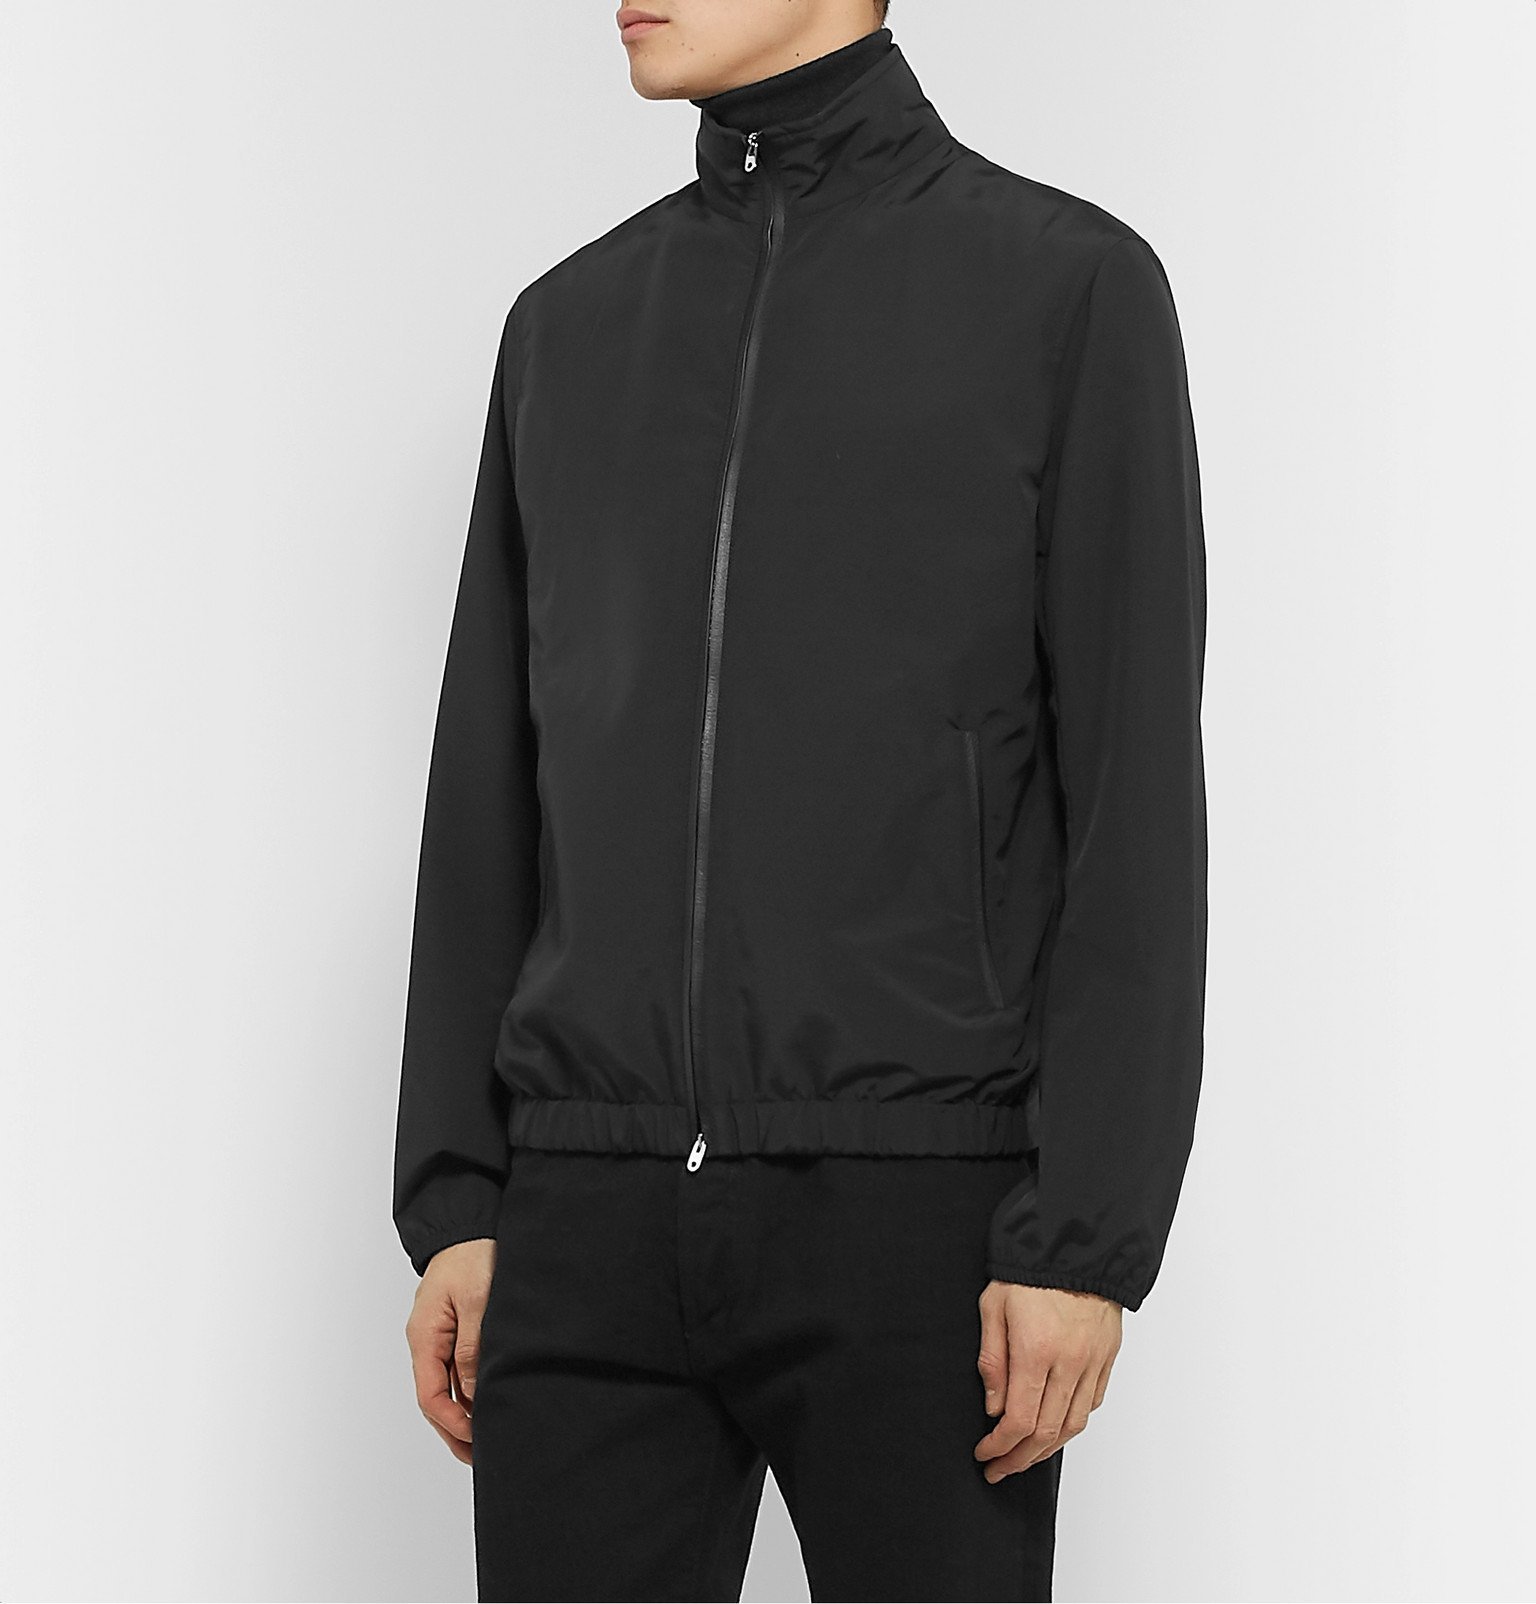 The Row - Leo Leather-Trimmed Wool-Blend Blouson Jacket - Black The Row